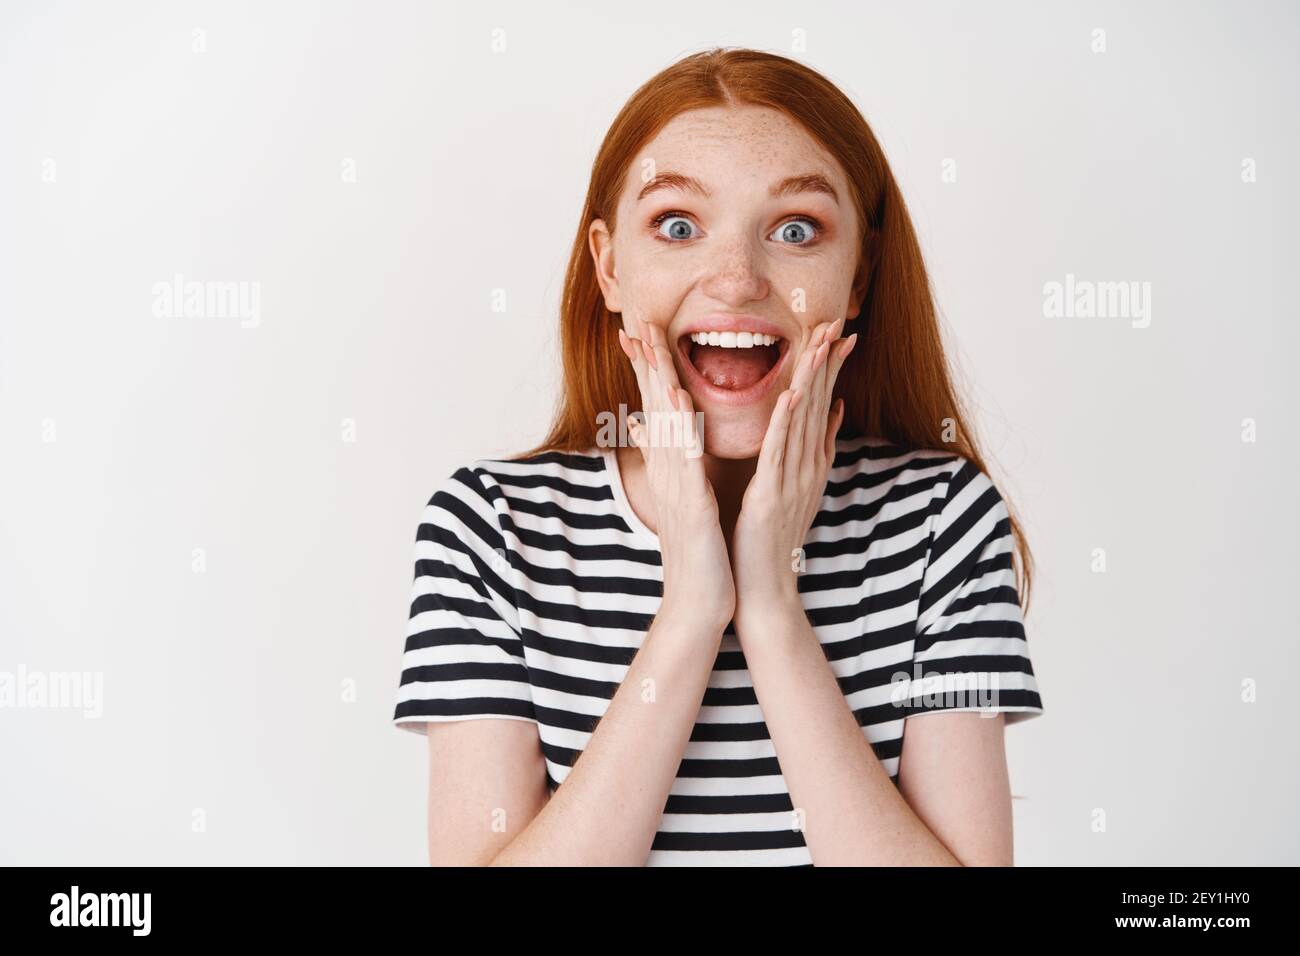 Rendering Anime Teenager Girl Red Hair Isolated White Background Stock  Photo by ©PhotosVac 414262130